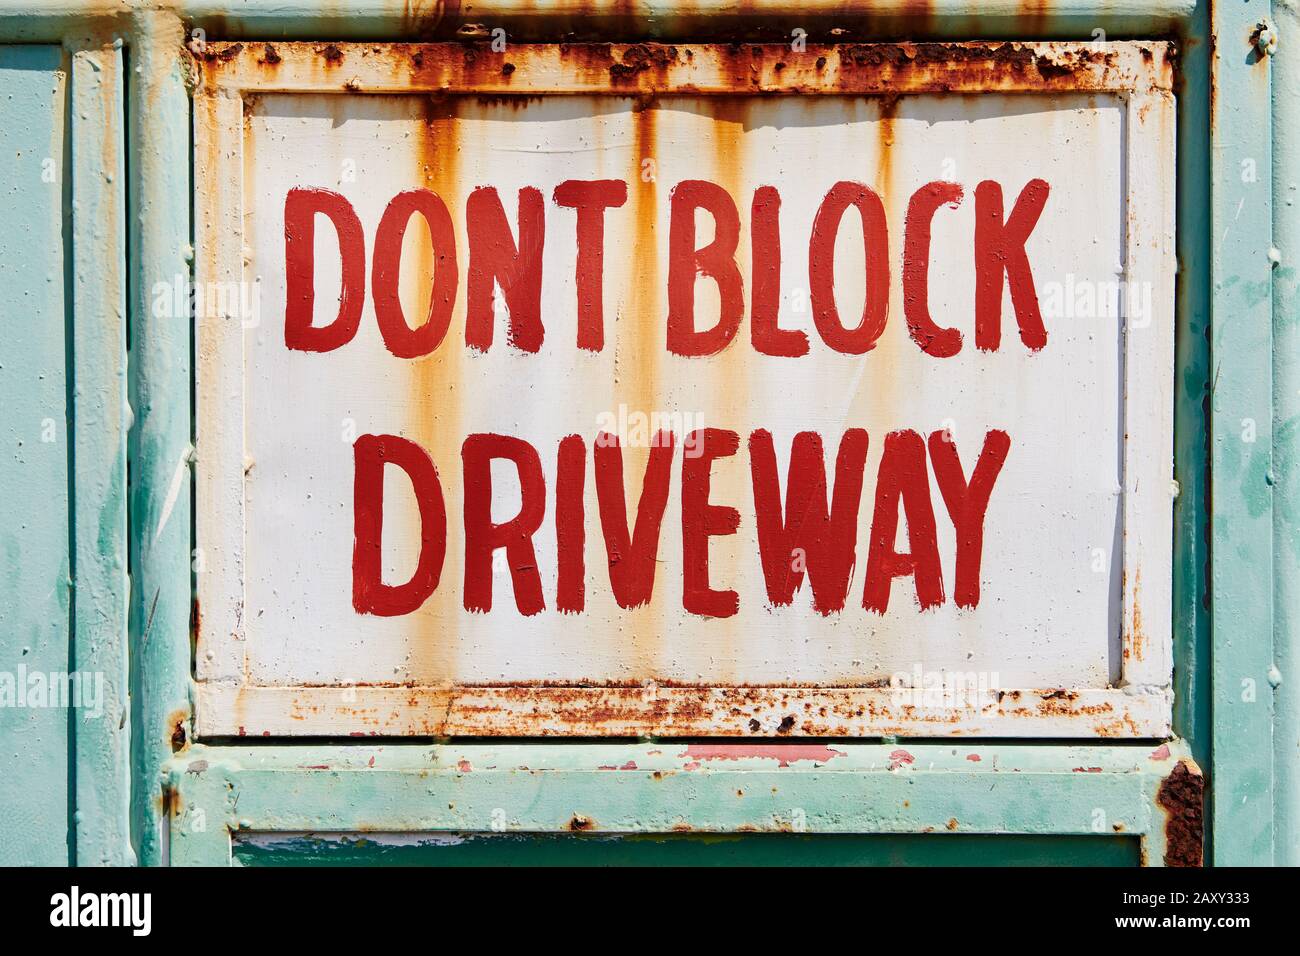 Close-up of a rusty painted sign 'Don't block the driveway', written in red letters on a metal gate, seen in Iloilo, Philippines, Asia Stock Photo